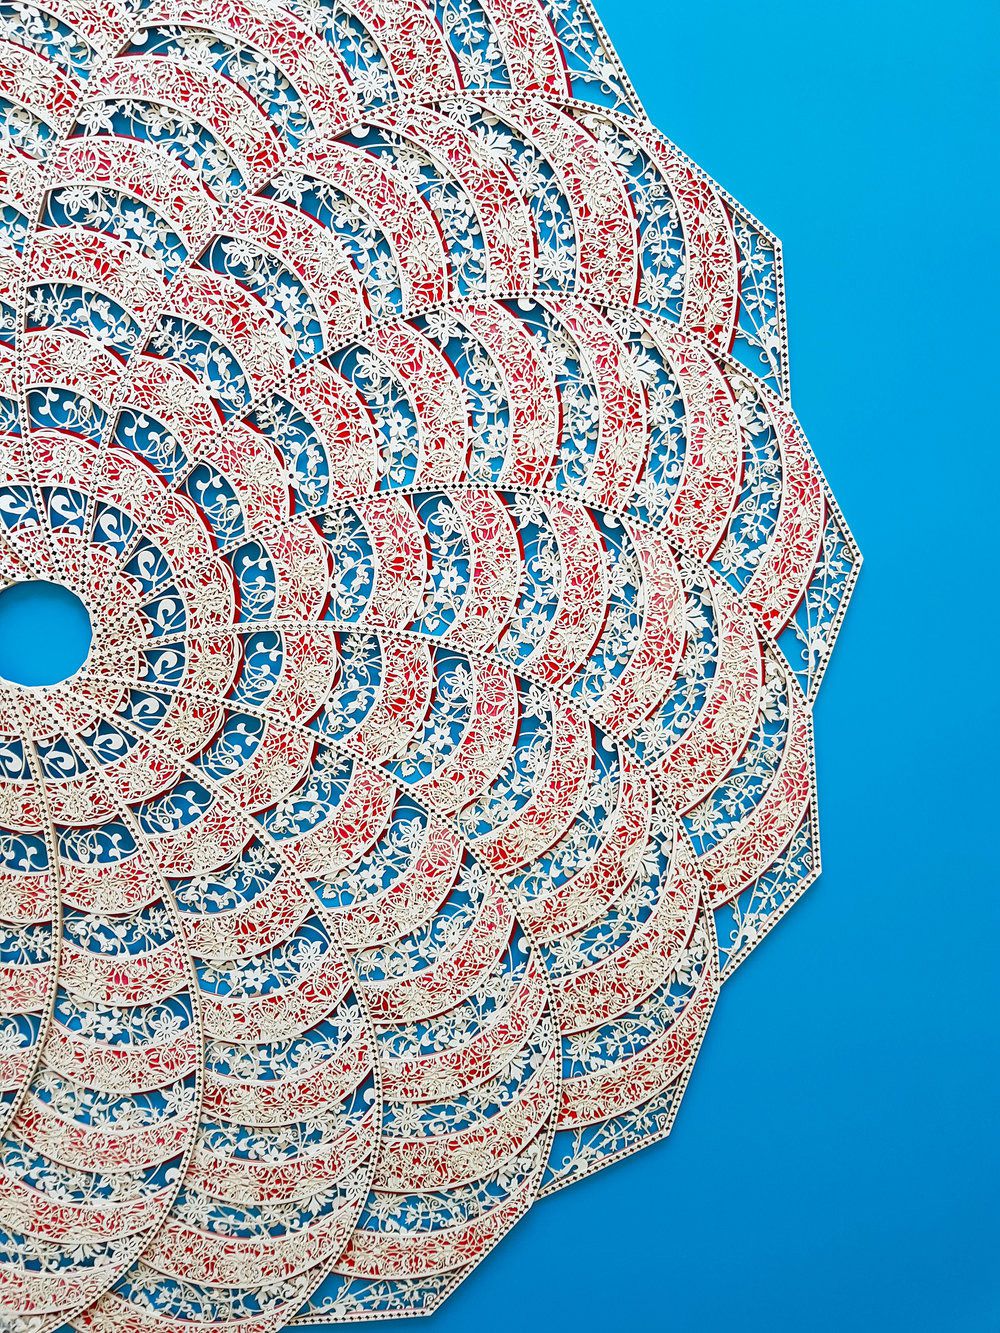 Intricate And Colorful Arabesque Made Of Laser Cut Paper Julia Ibbini 13